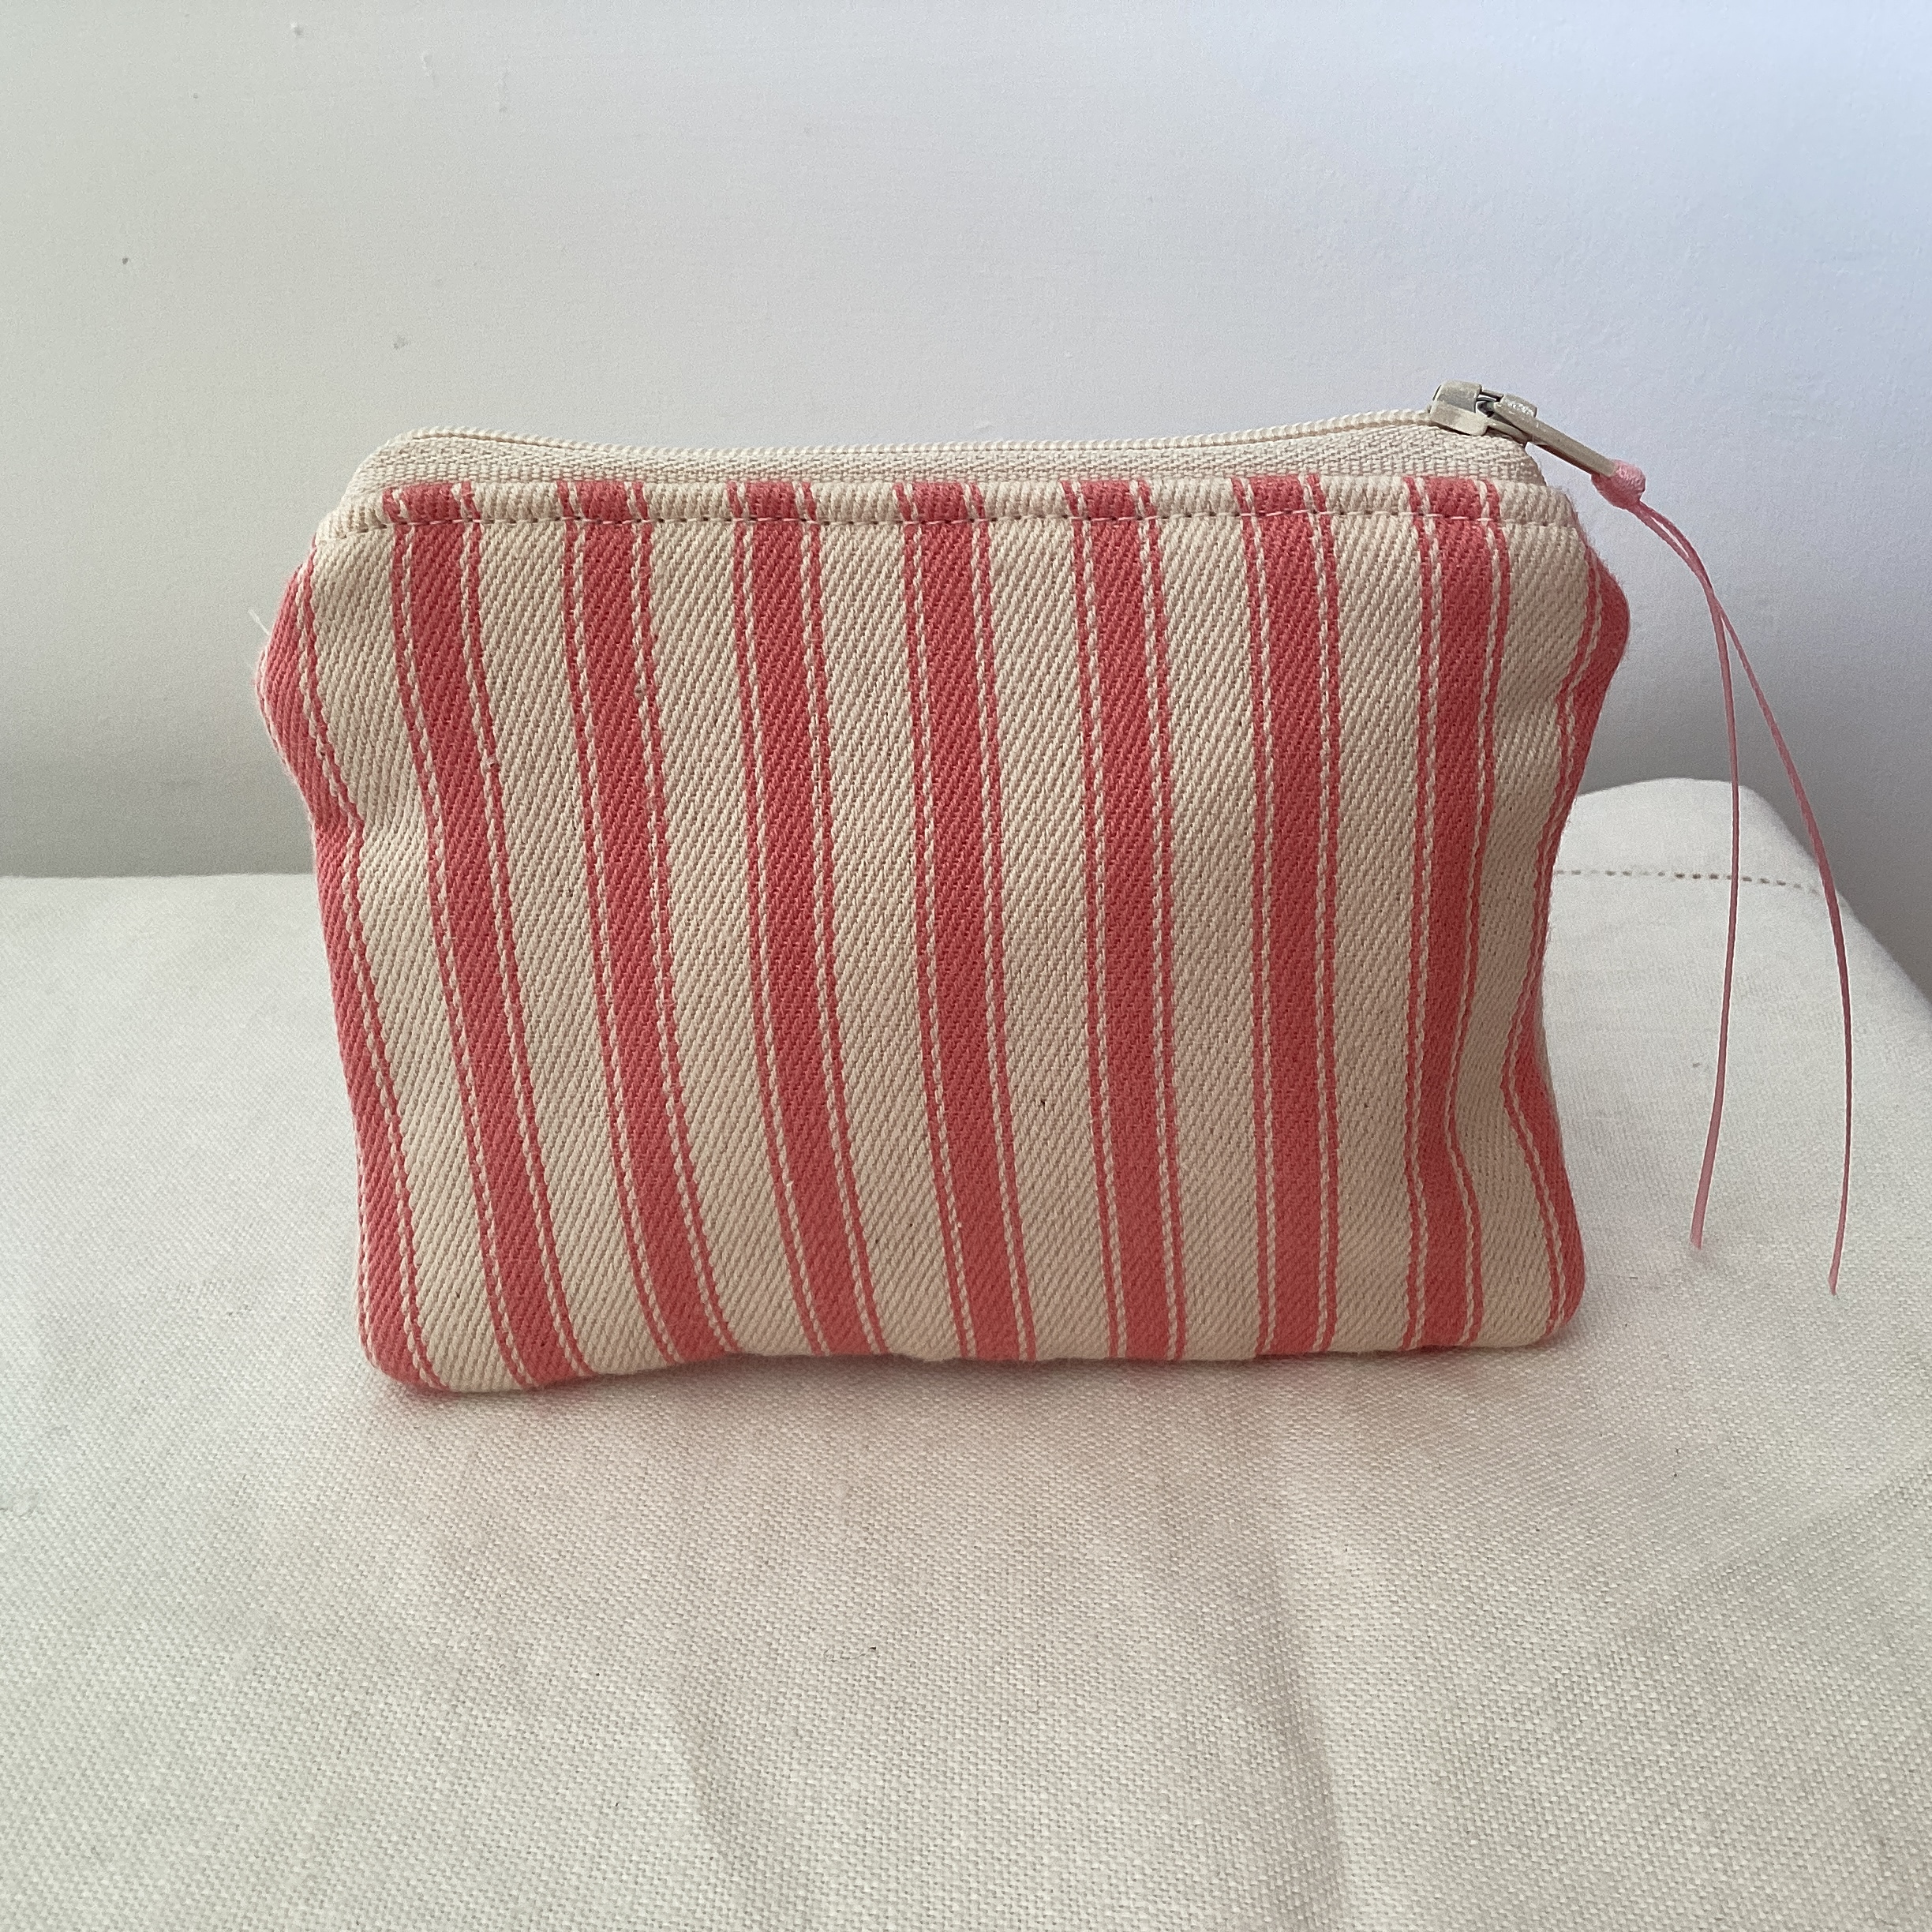 Zipped Coin Purse - pink and cream stripe